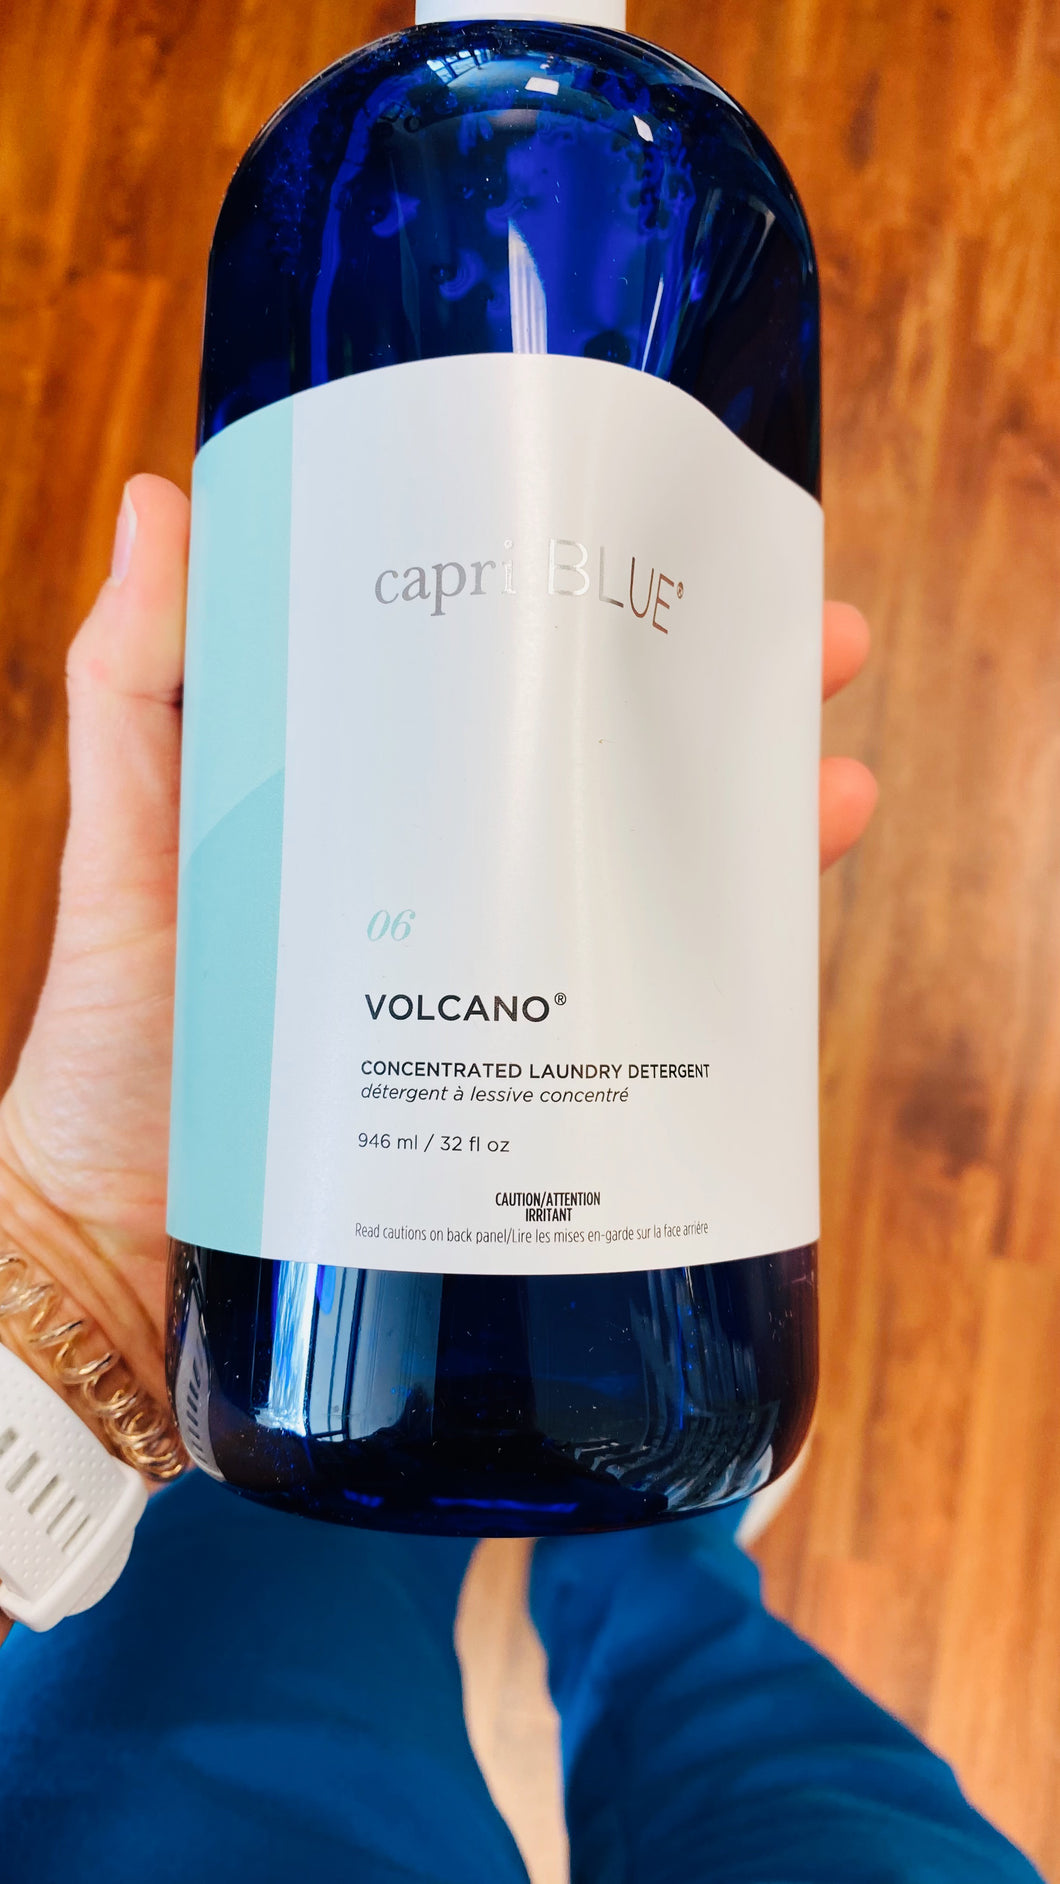 Capri Blue Volcano Concentrated Laundry Detergent